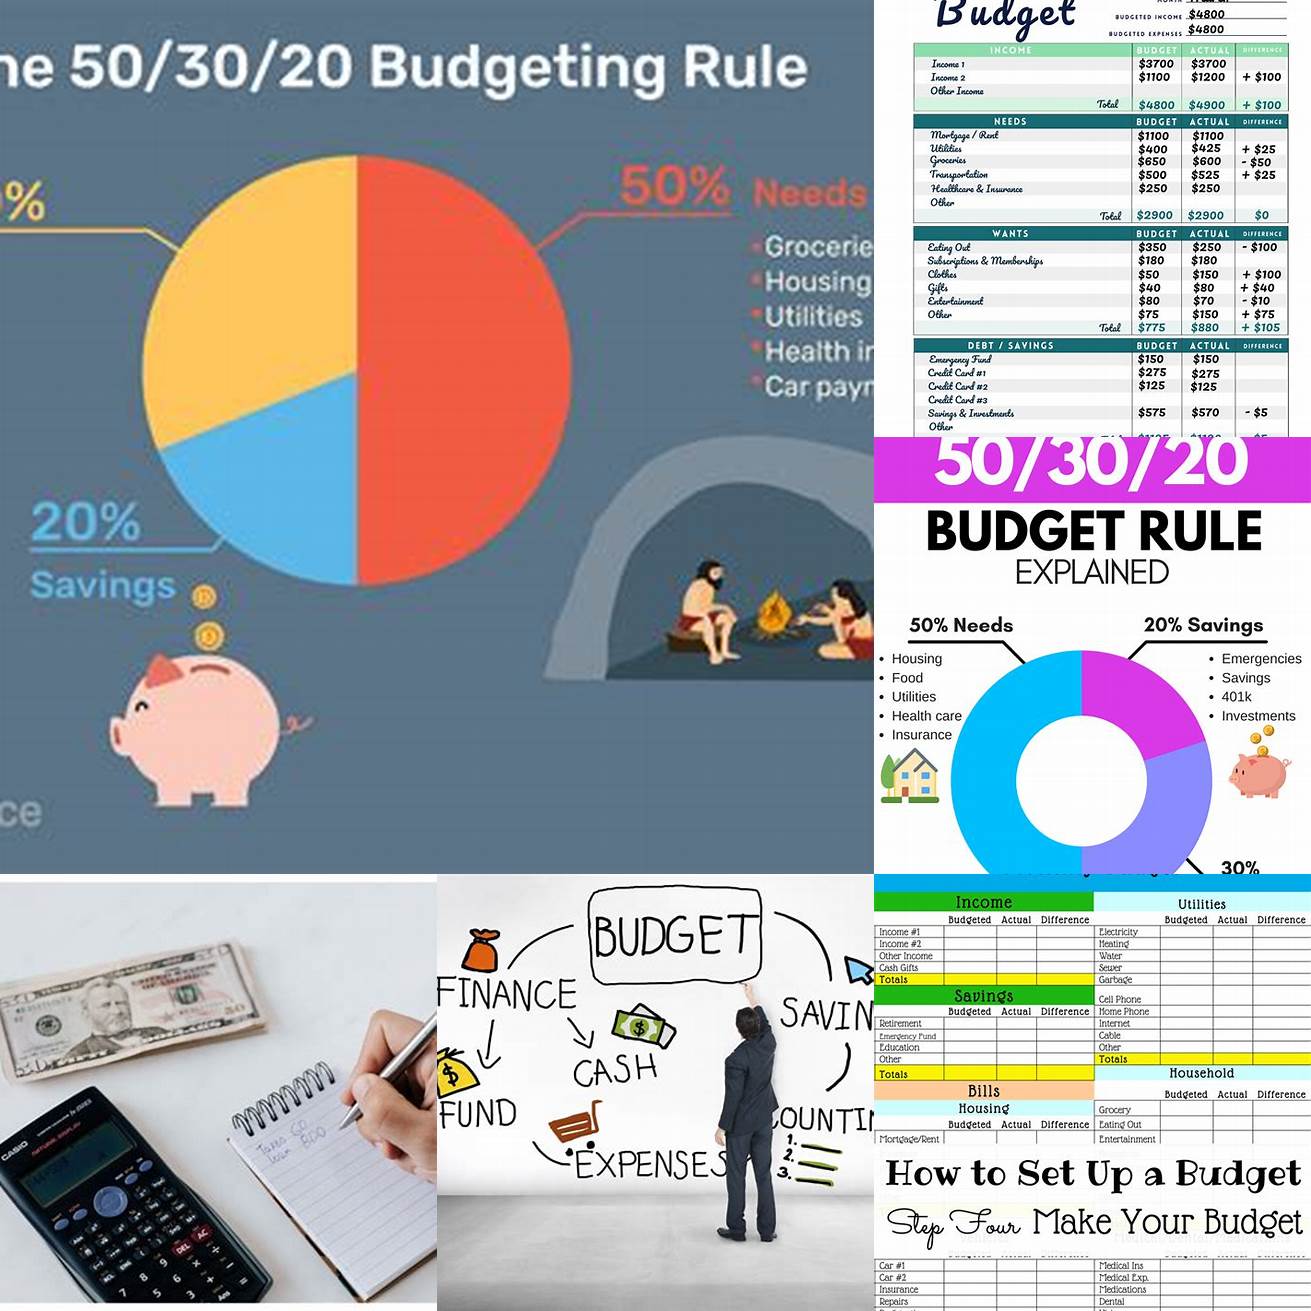 Set a budget - Determine how much you are willing to spend before you start shopping